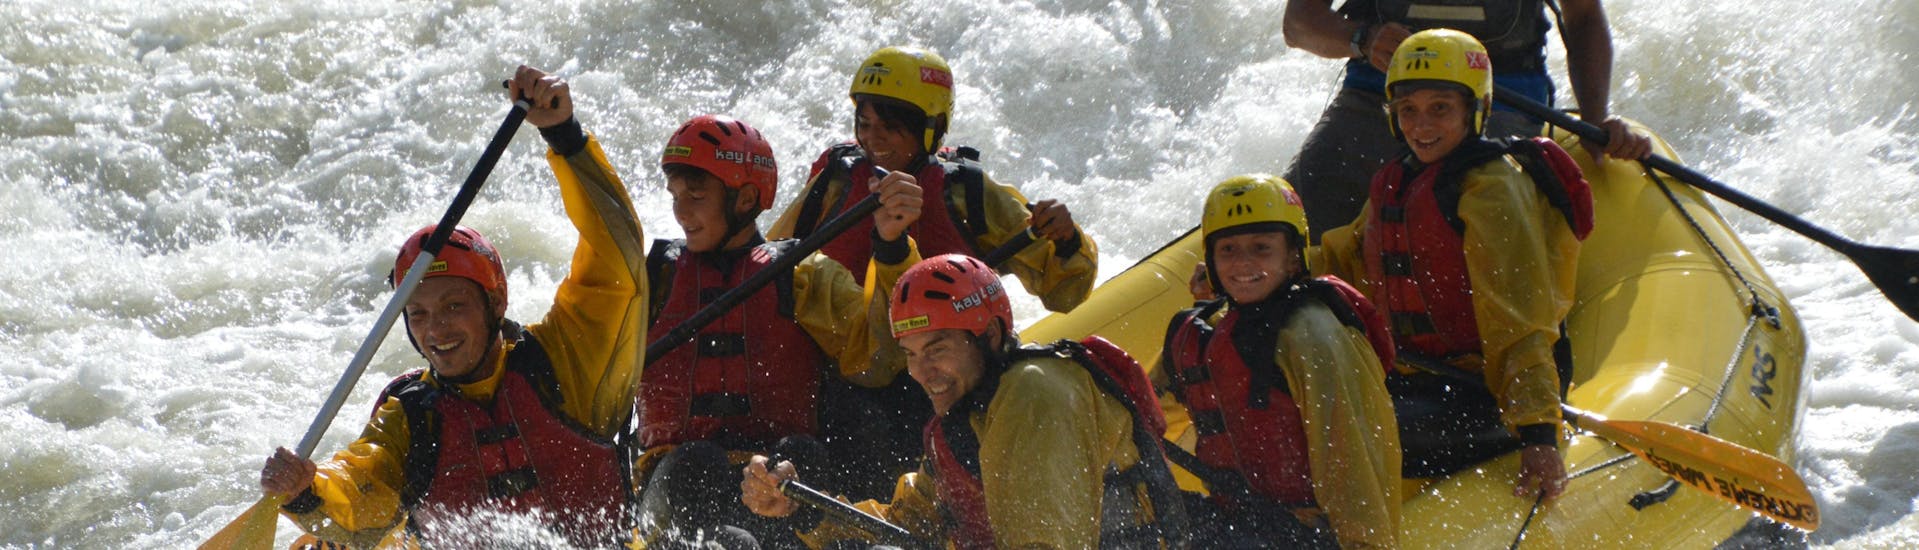 Participants are giving it their best during the Rafting on the Noce in Val di Sole for Families - Exciting.